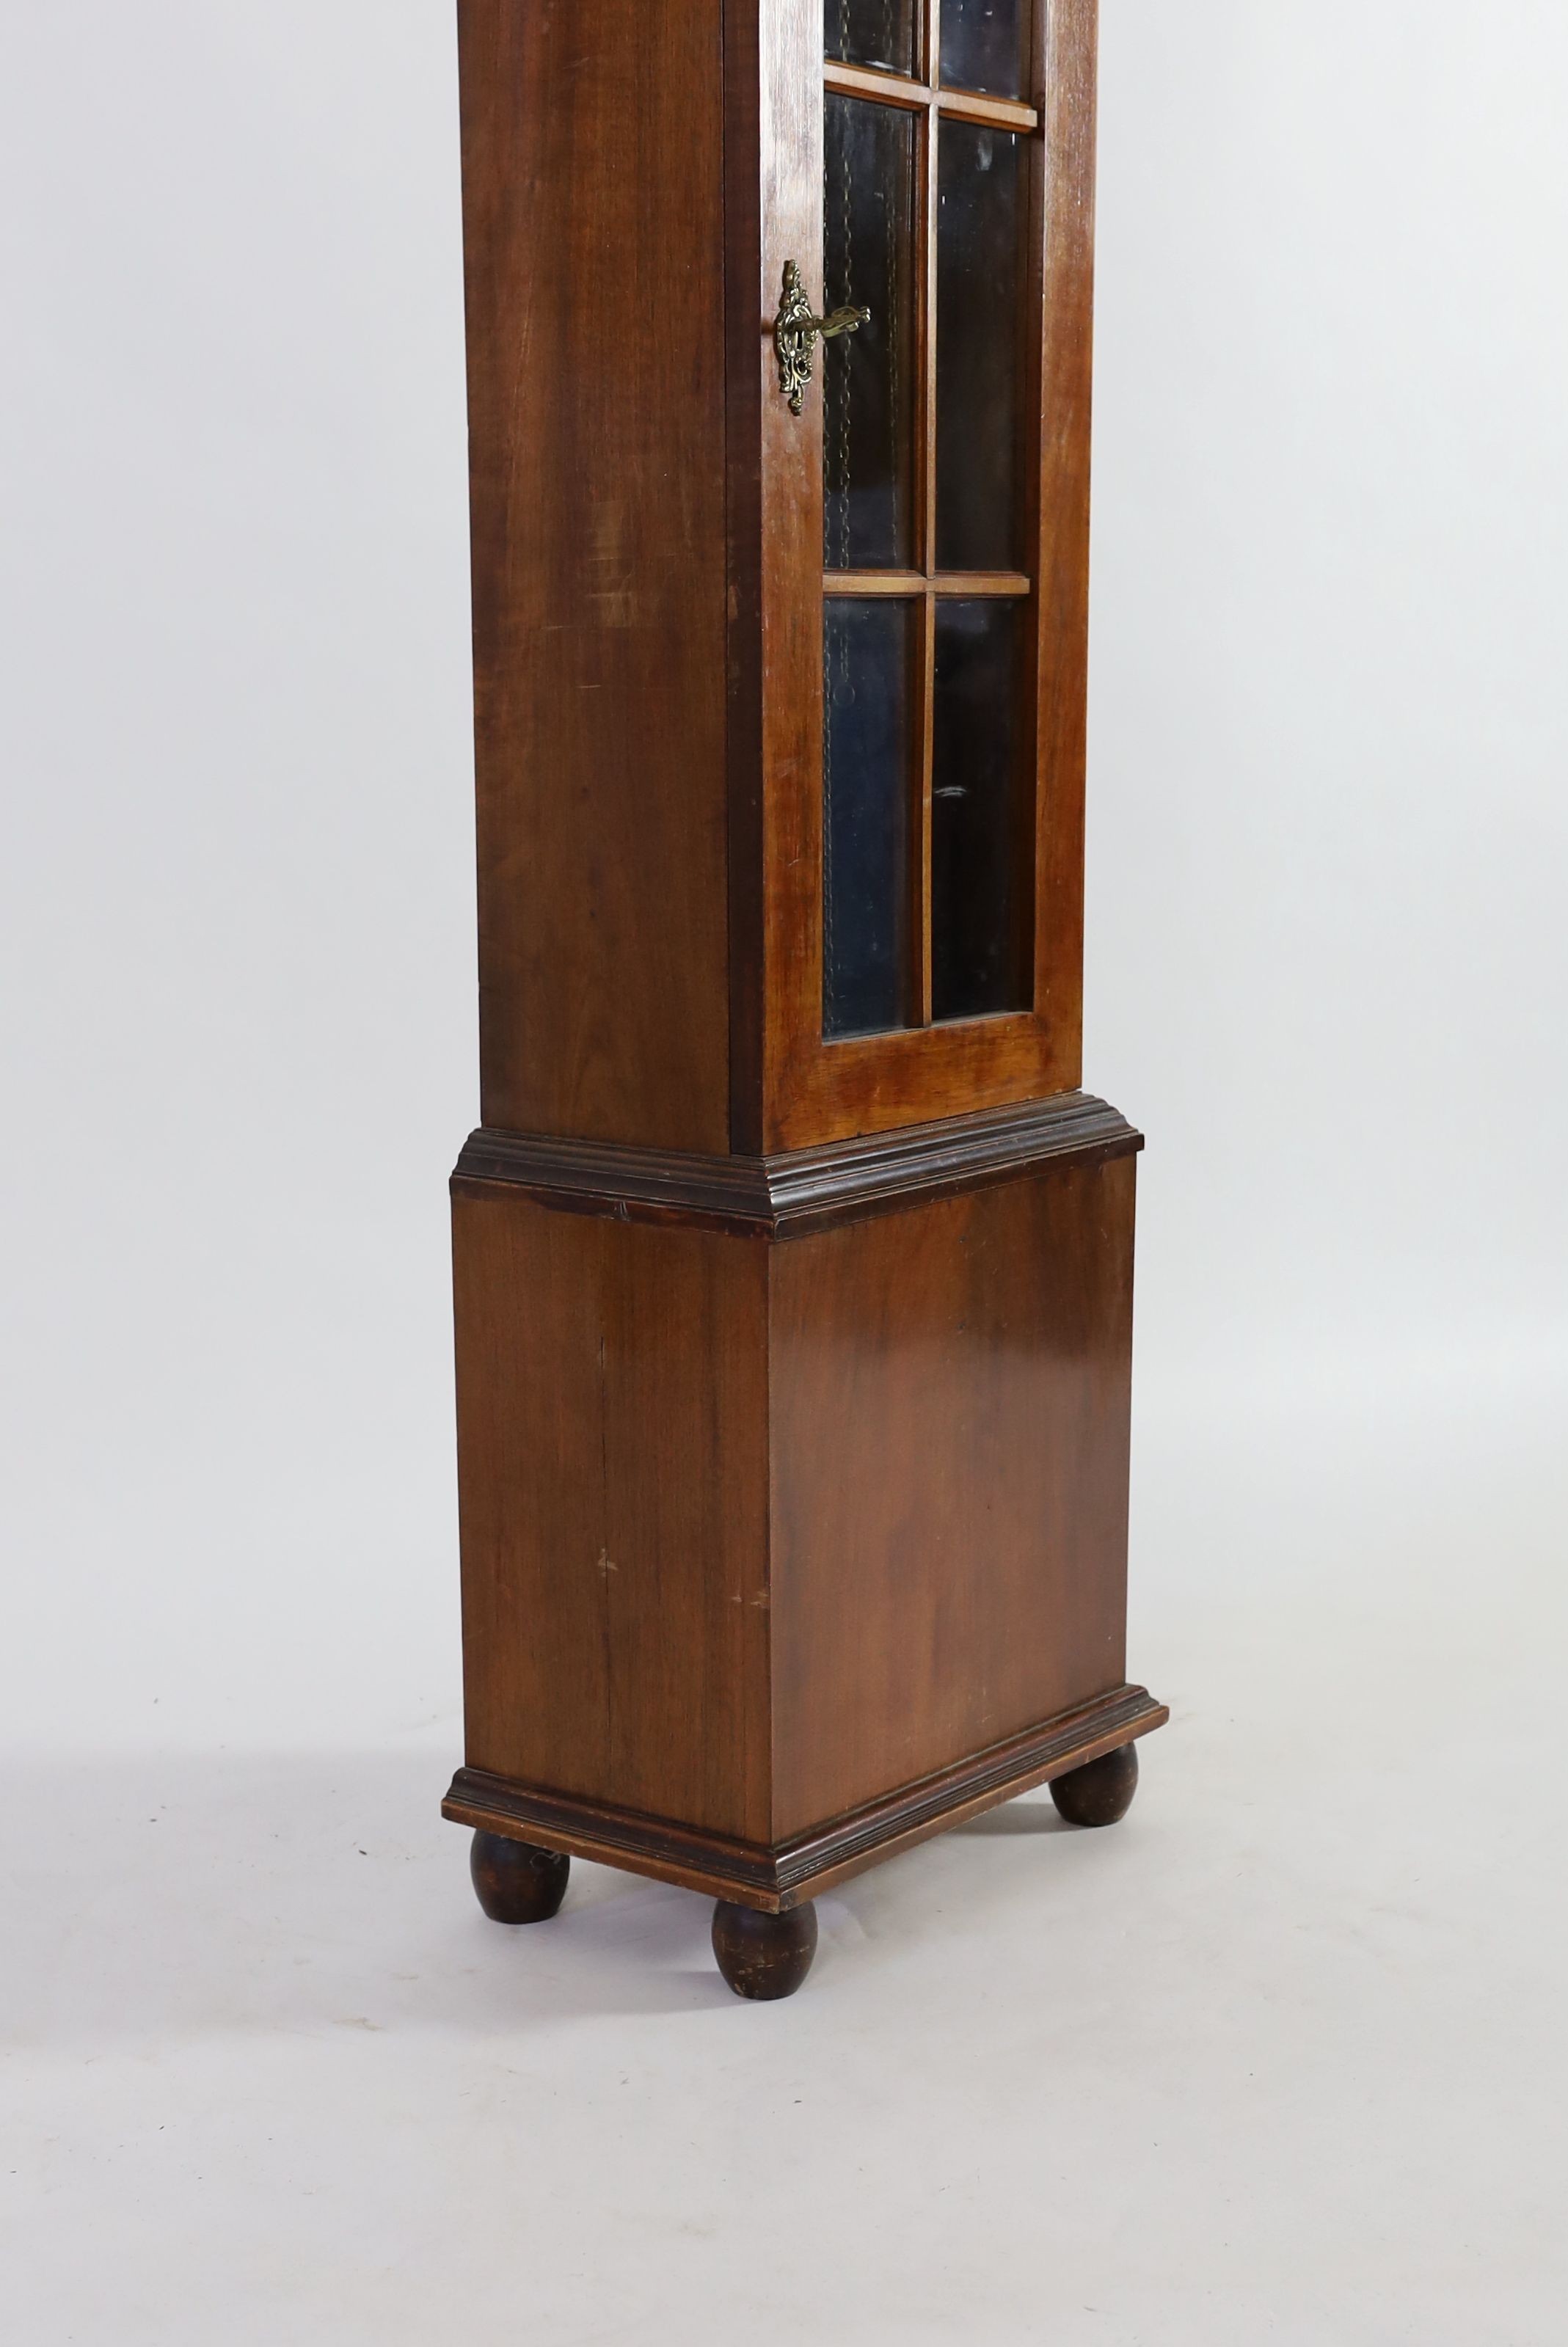 A mahogany cased 8 day longcase clock, by Anton Jagemann, Munchen, with 26cm dial, case 199cm high